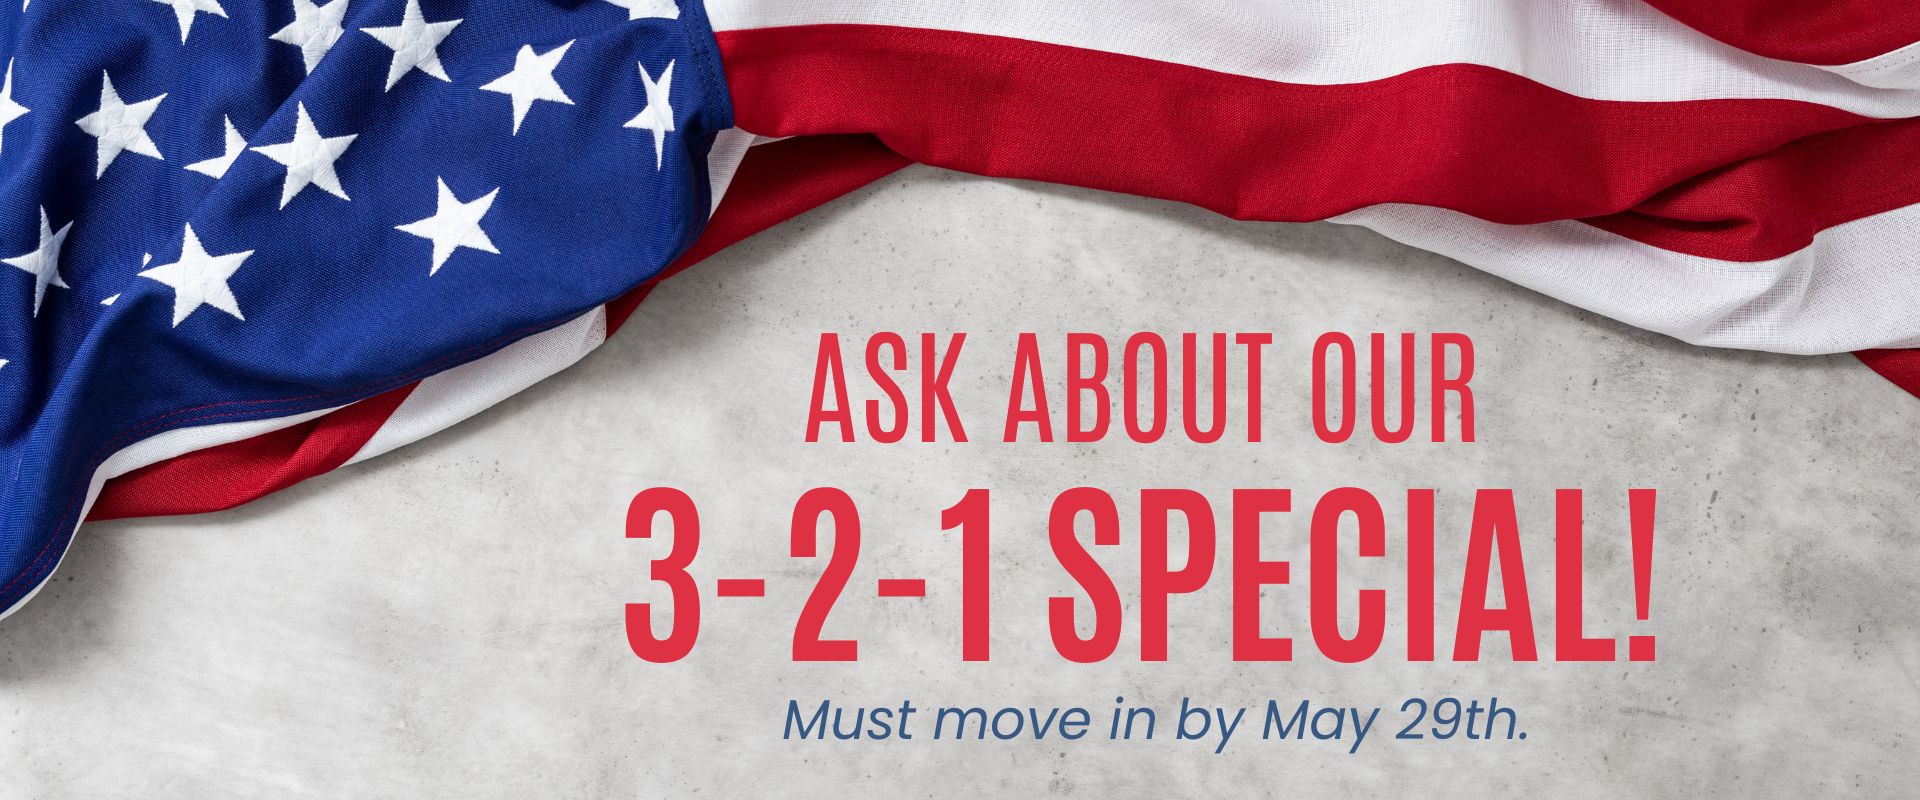 Ask about our 3-2-1 special!  must move in by May 29th.